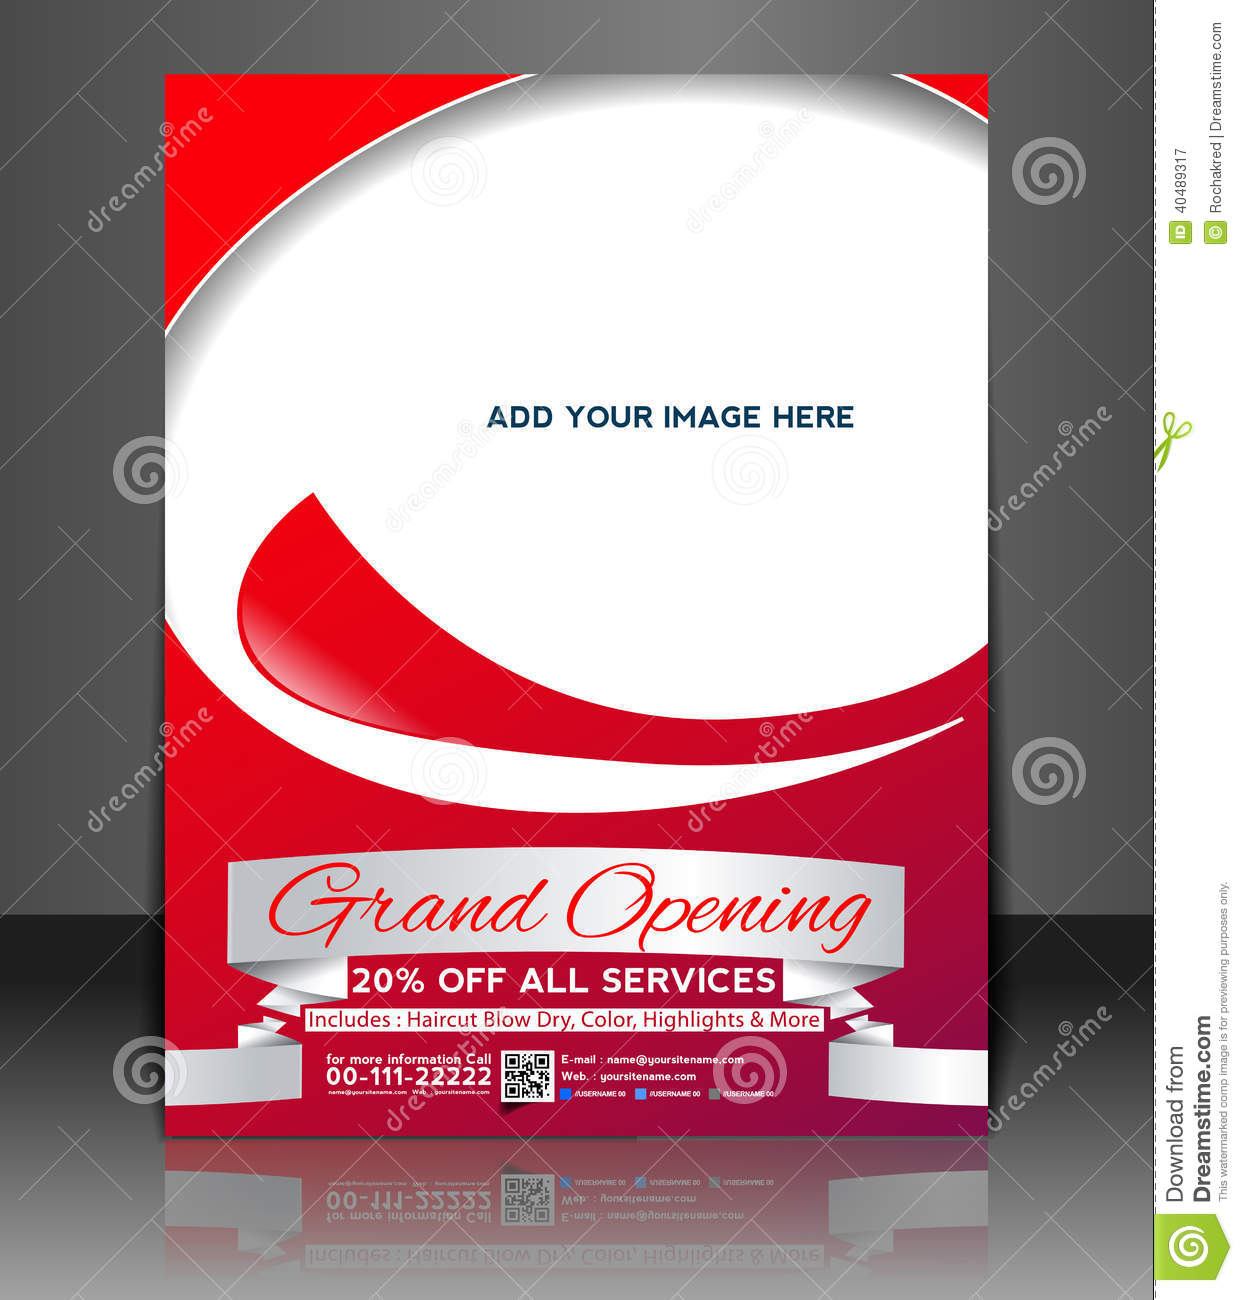 Grand Opening Flyer Design Stock Vector. Illustration Of In Now Open Flyer Template